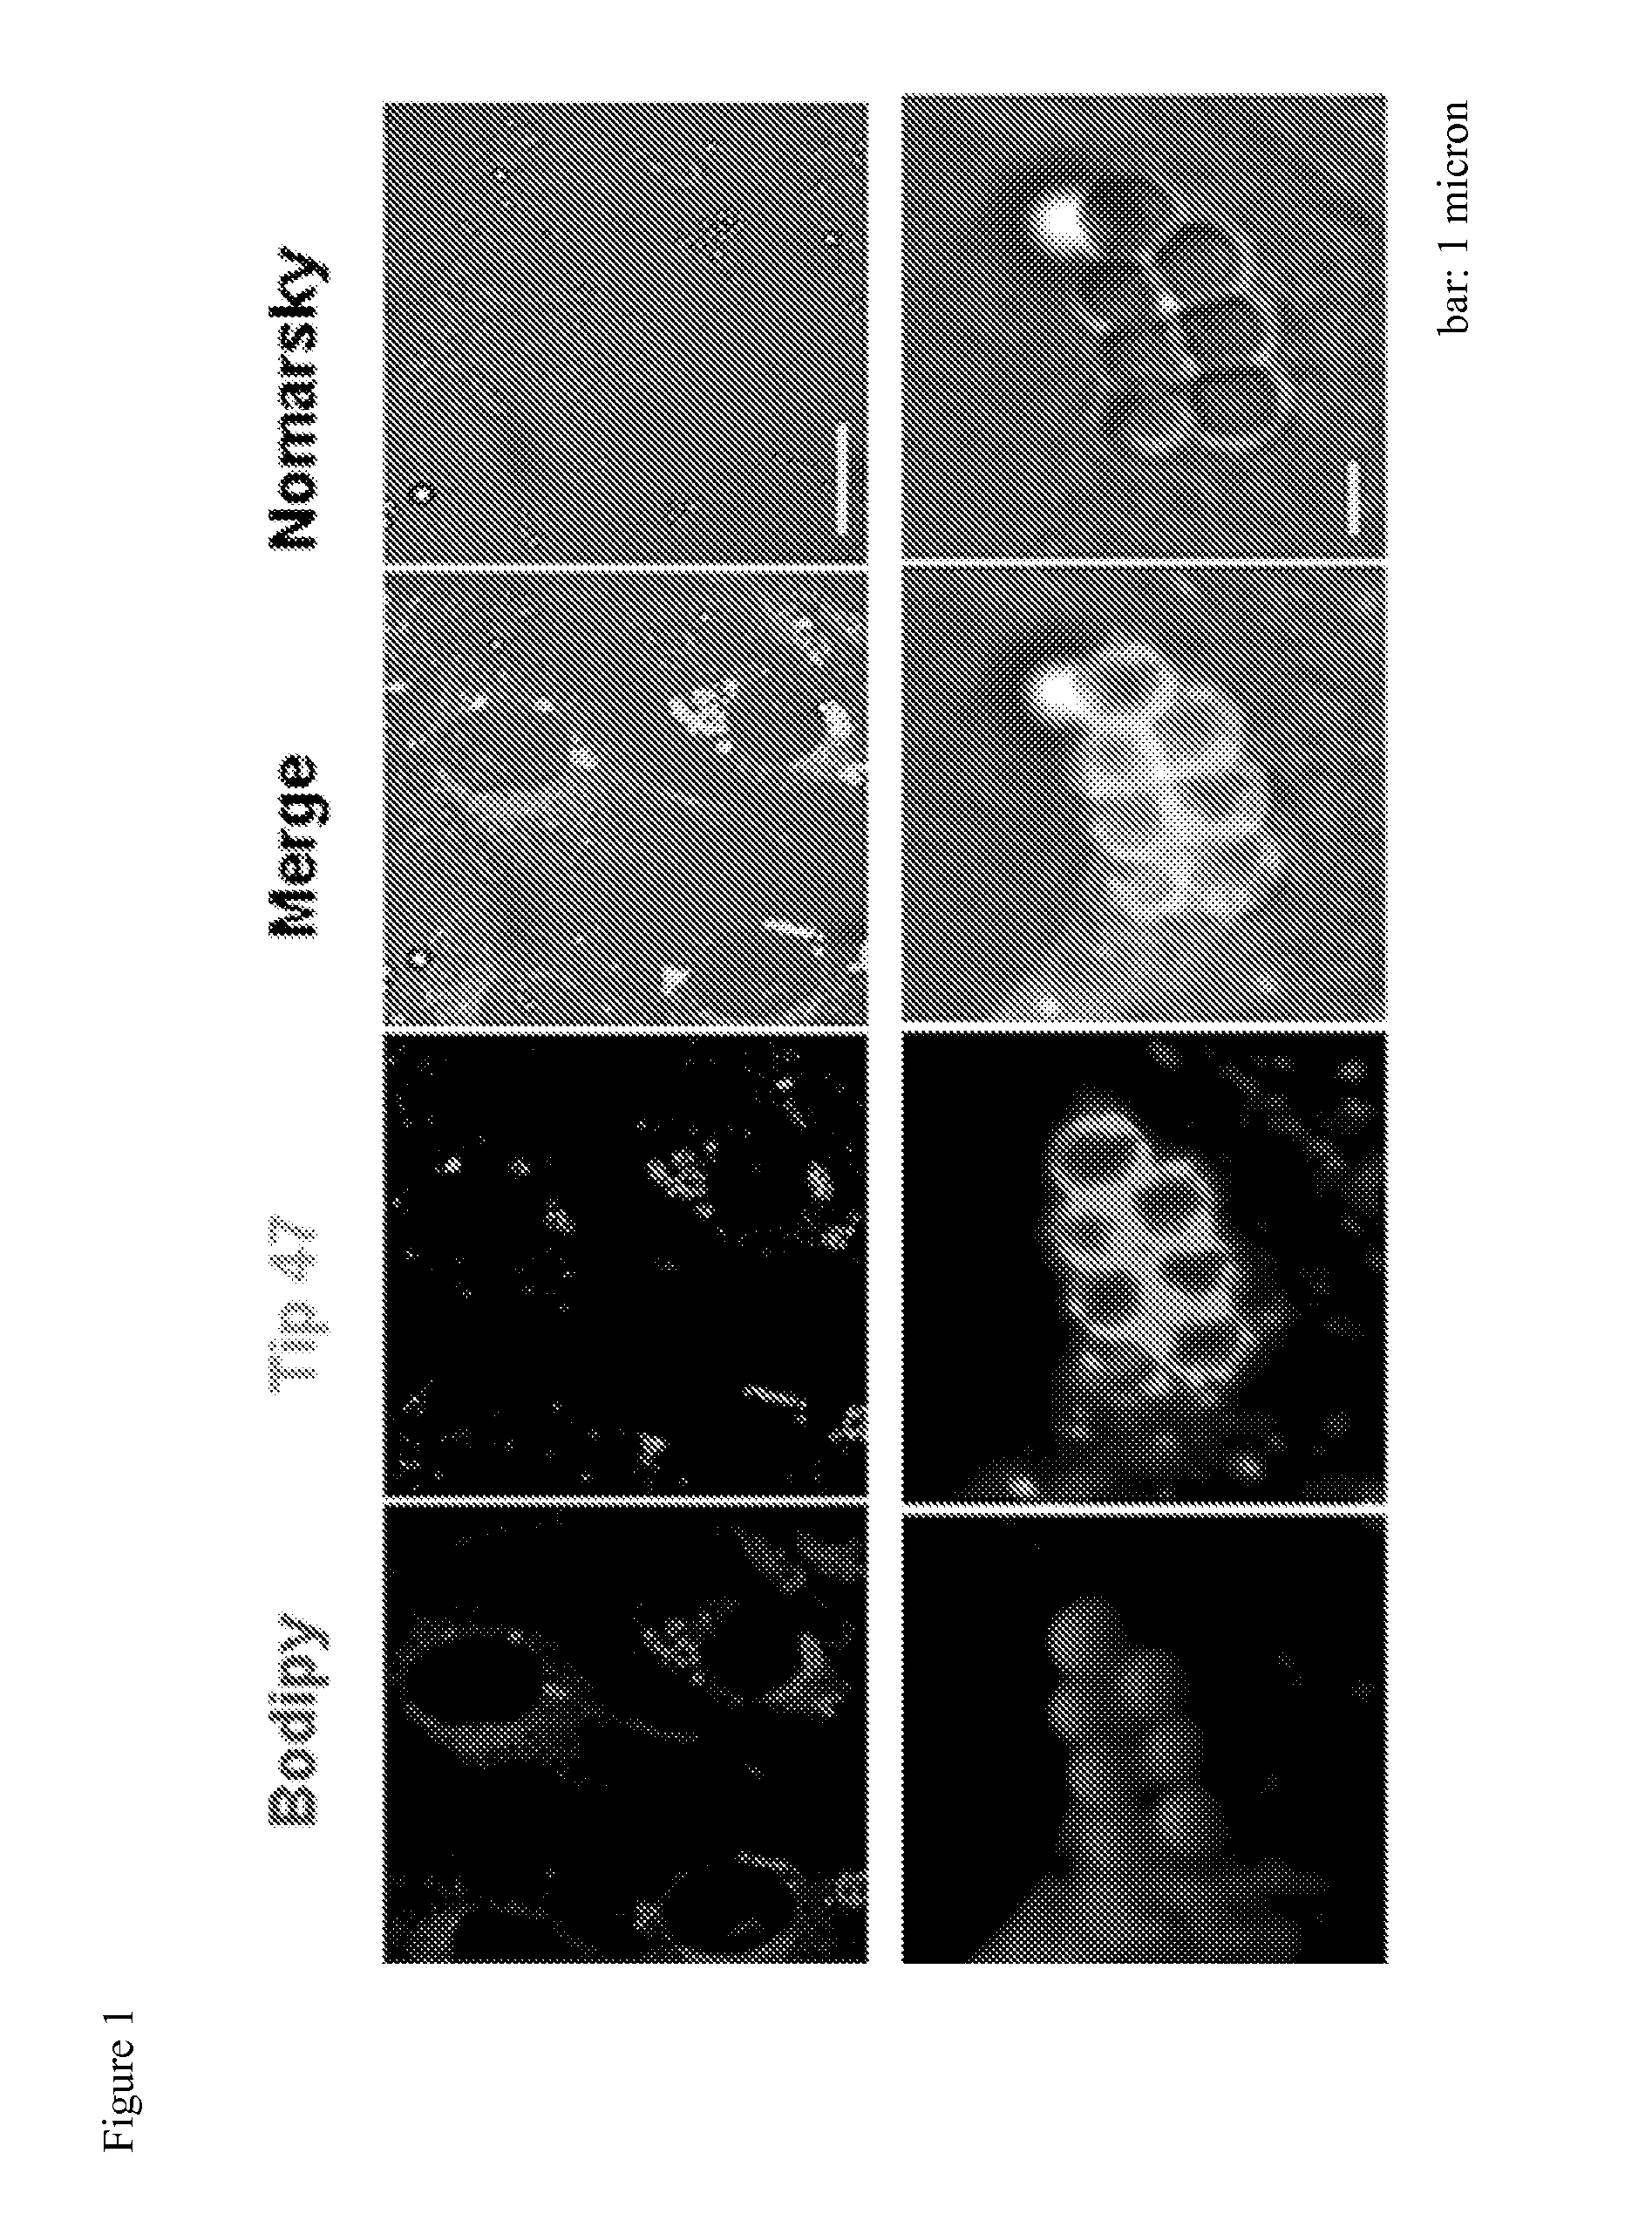 Method of measuring lipid droplets and applications of using the same